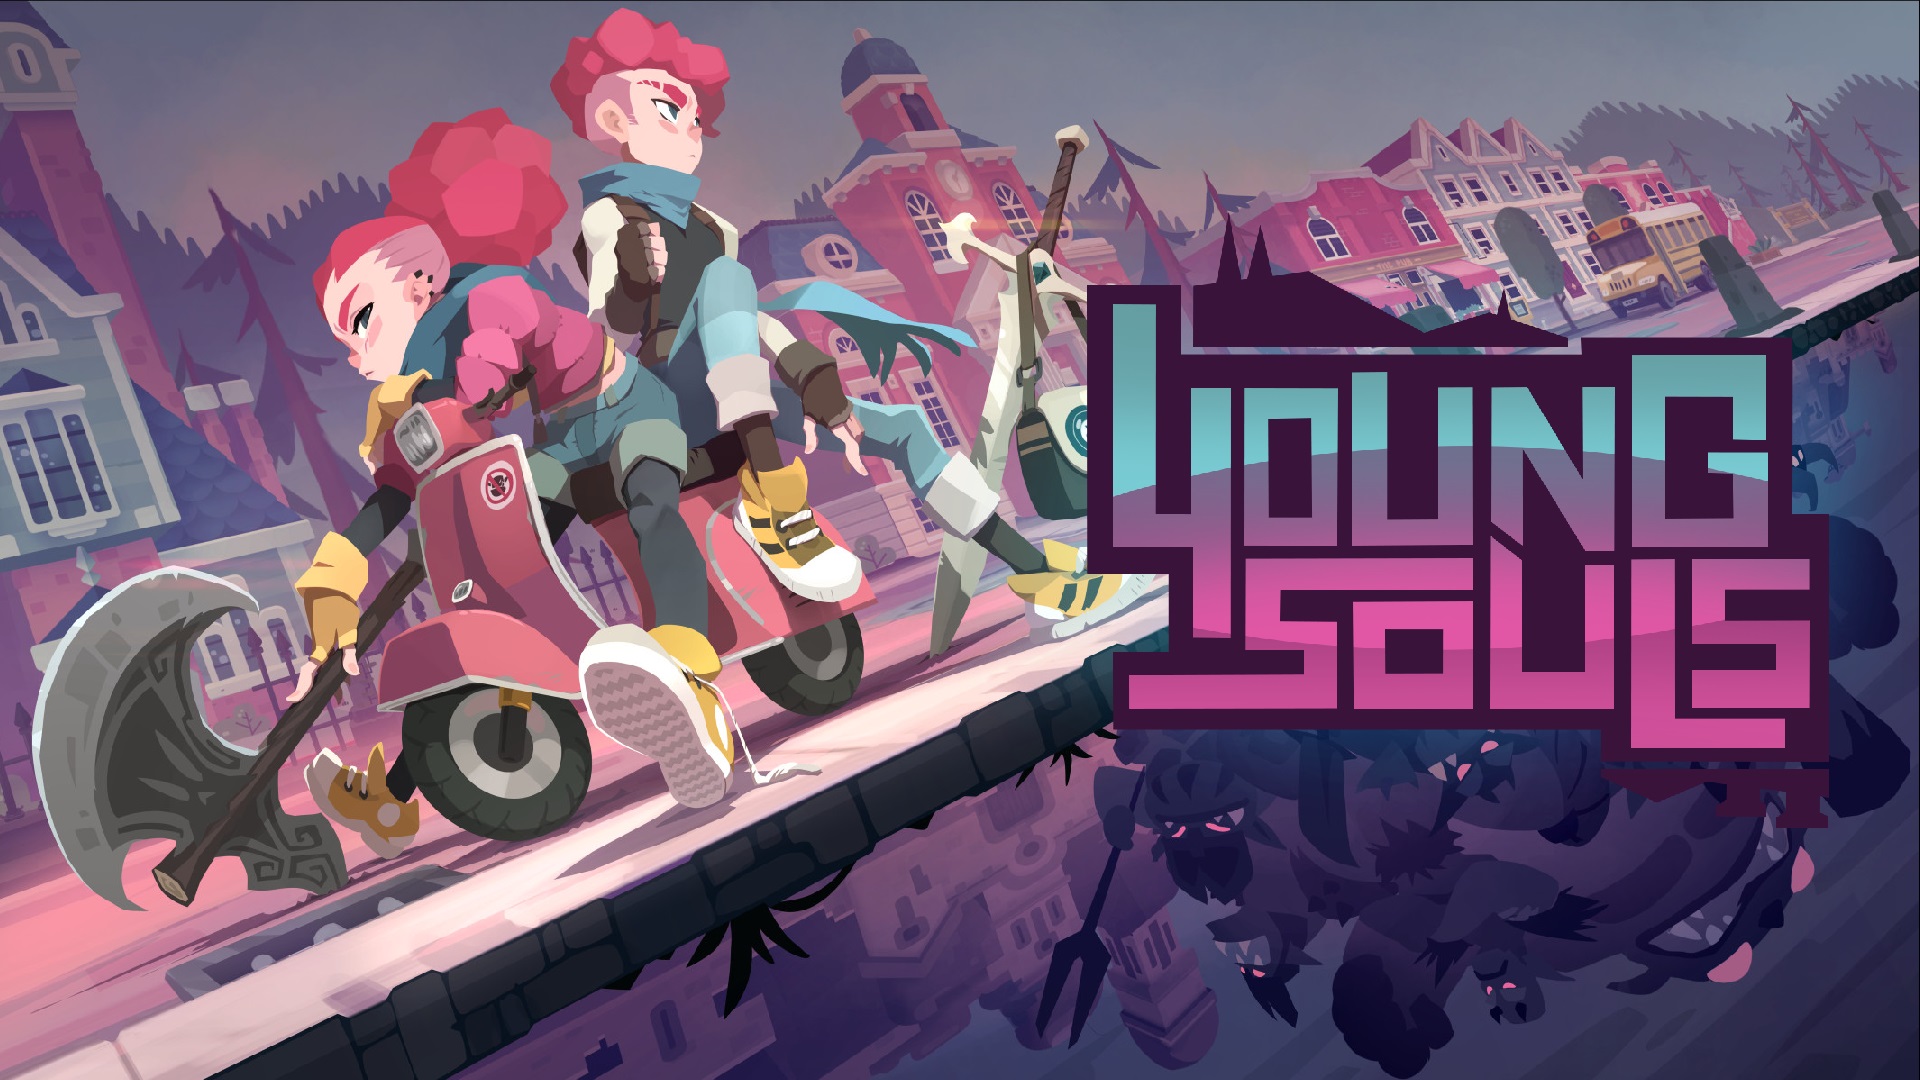 Co-op beat ’em up Young Souls is launching on PC and consoles this Fall